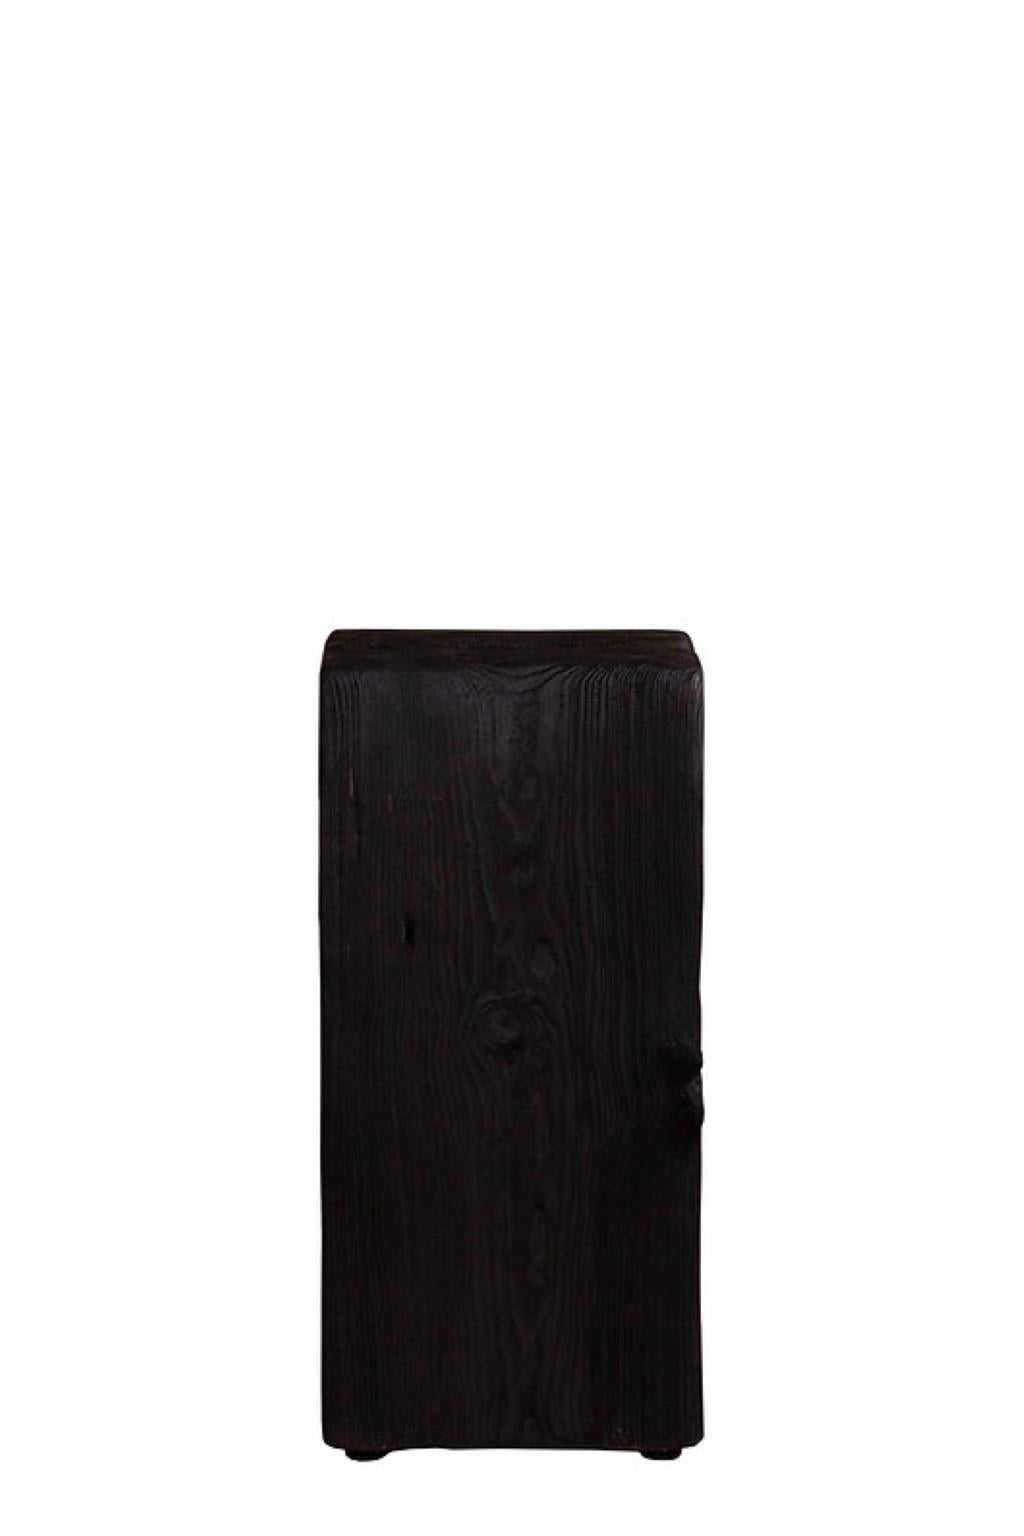 Essence M by Rectangle Studio
Dimensions: 25x25x50 cm
Materials: Solid Pine, Natural Black Wood oil 

Kabuk is an alternative product with sculptural appearance which can be used as a coffee table and a bedside table with its modern